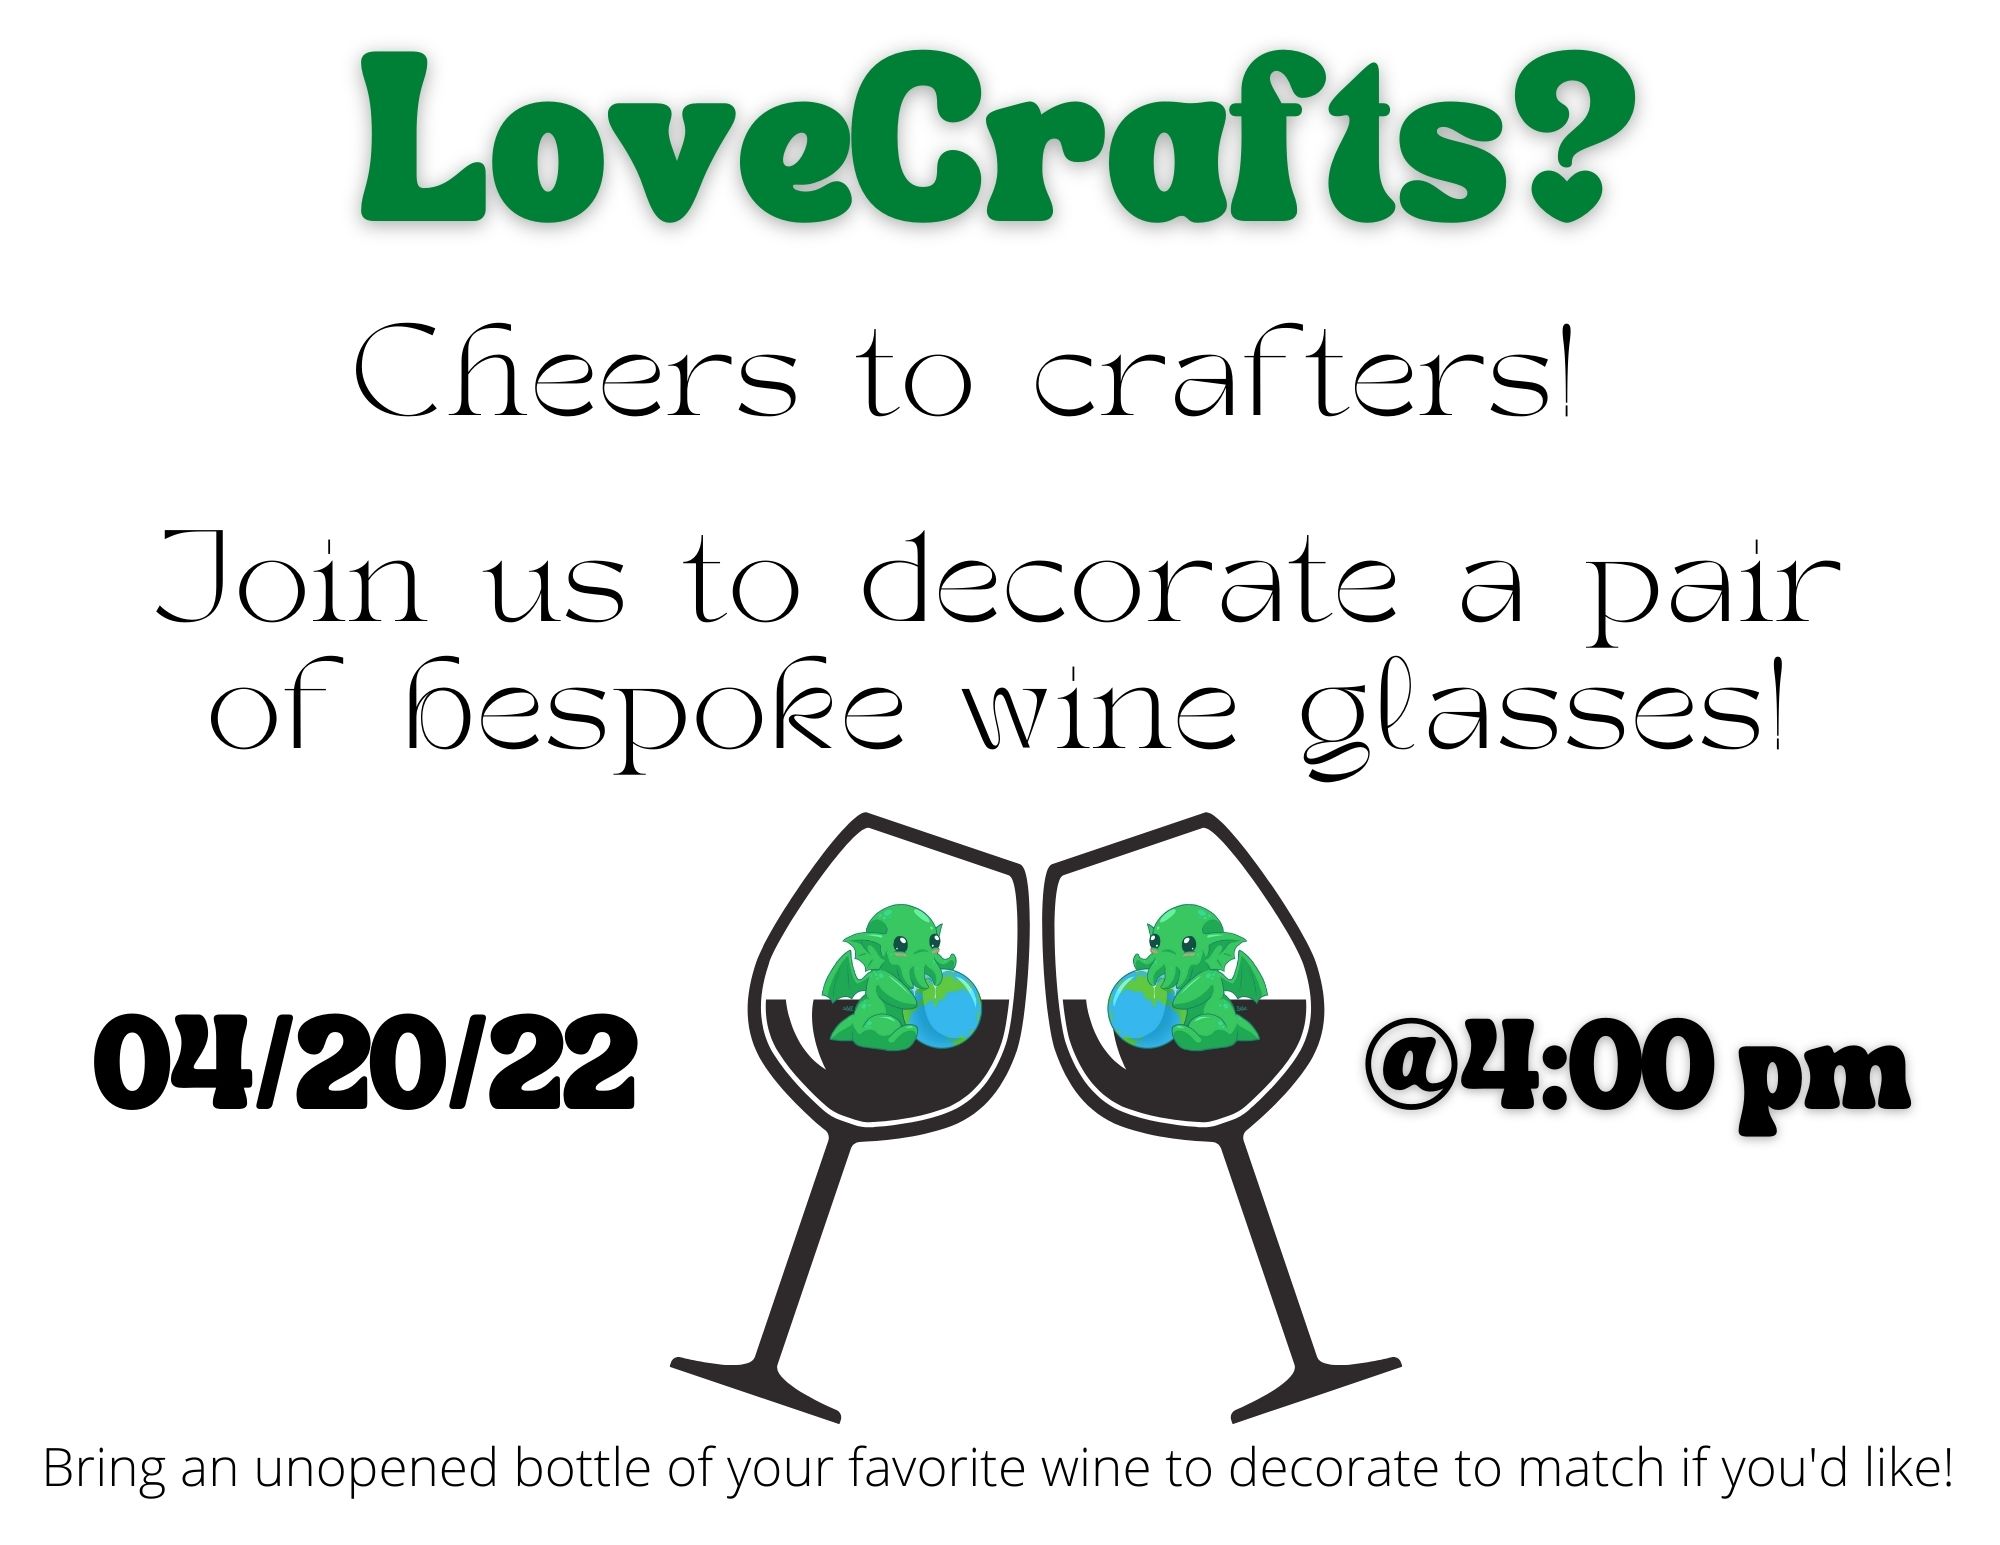 Love Crafts? Join us this April to decorate bespoke wine glasses!